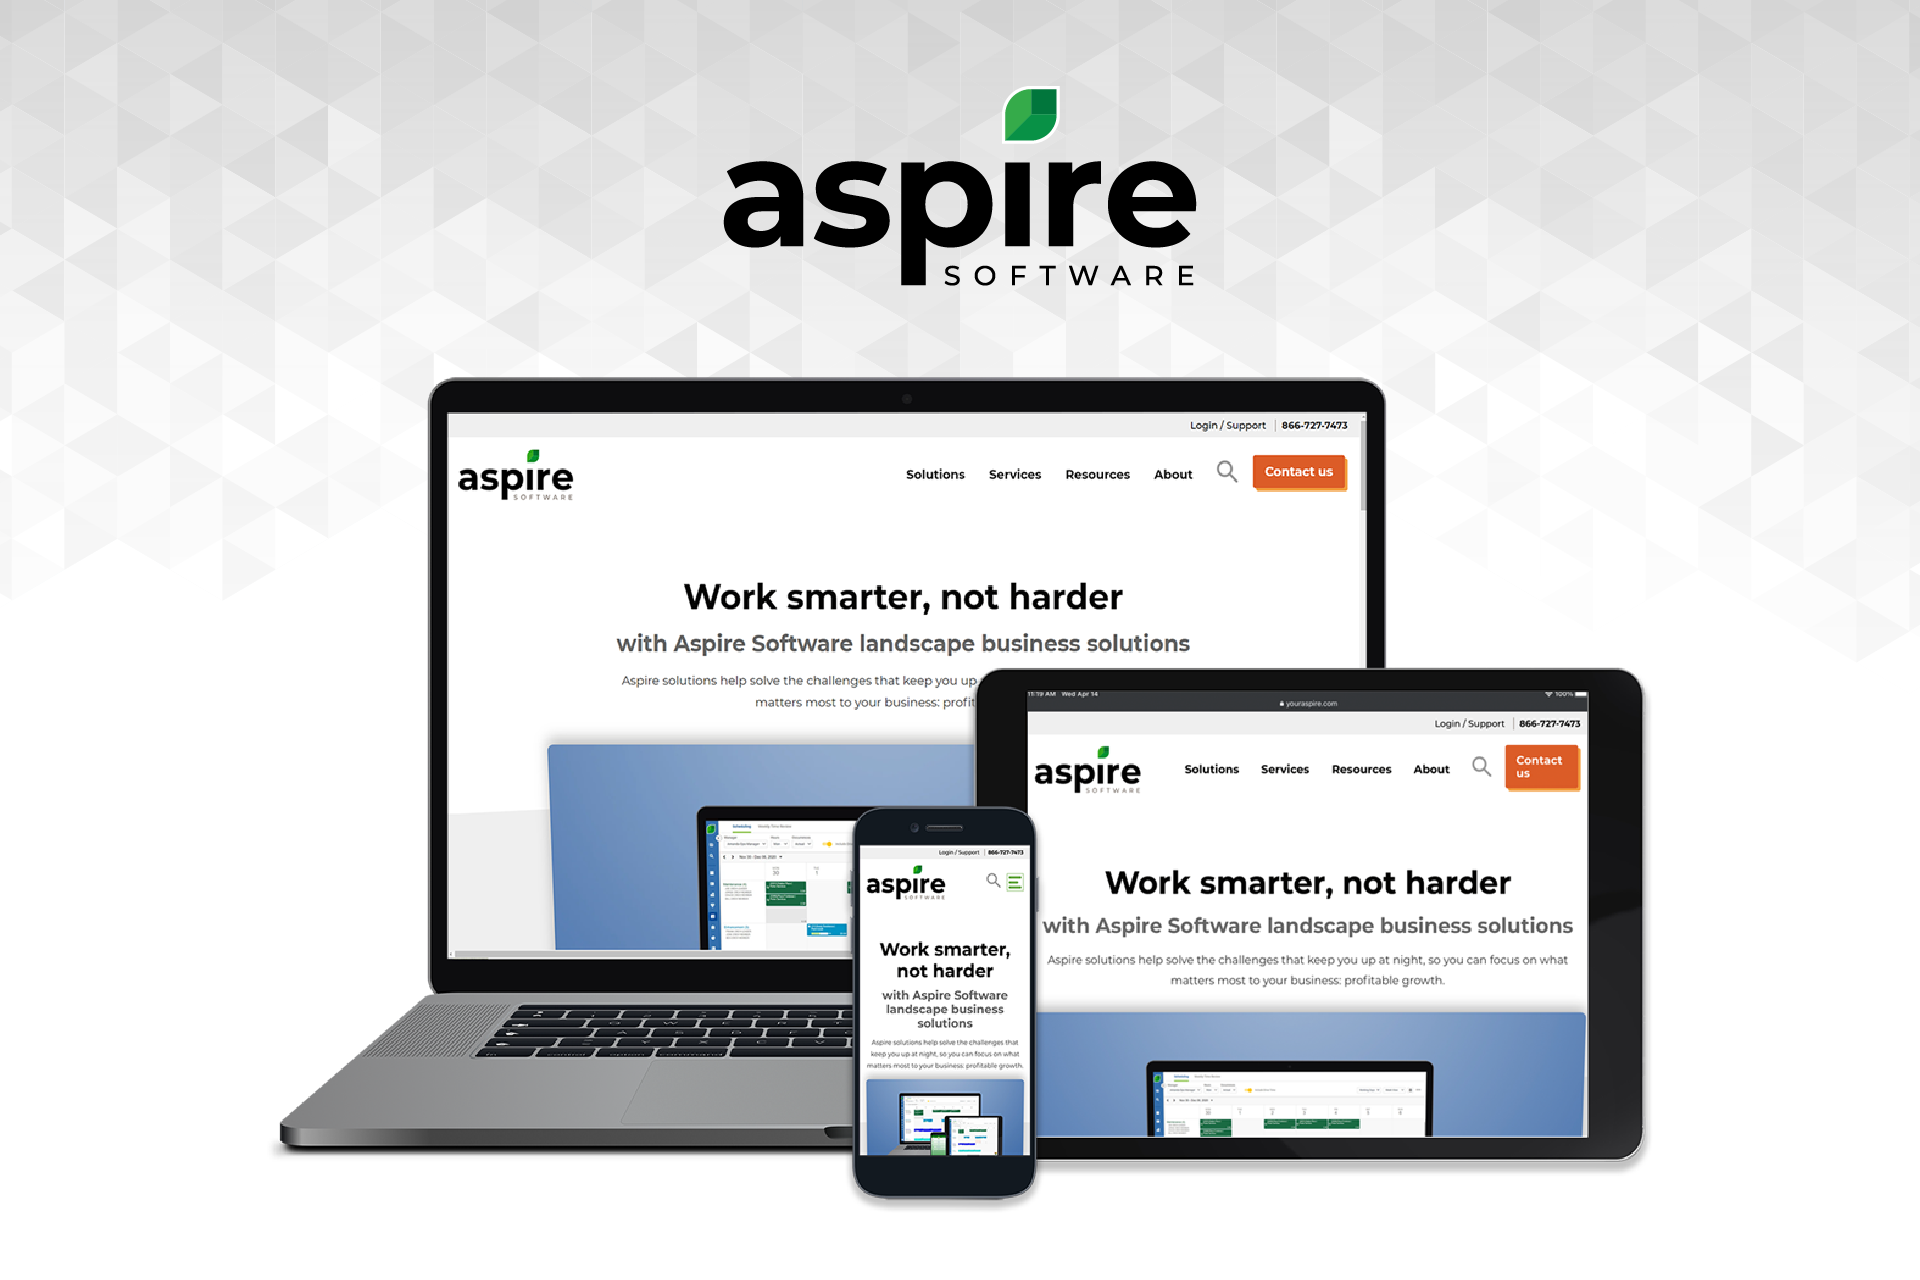 Introducing a new look for Aspire Software's website